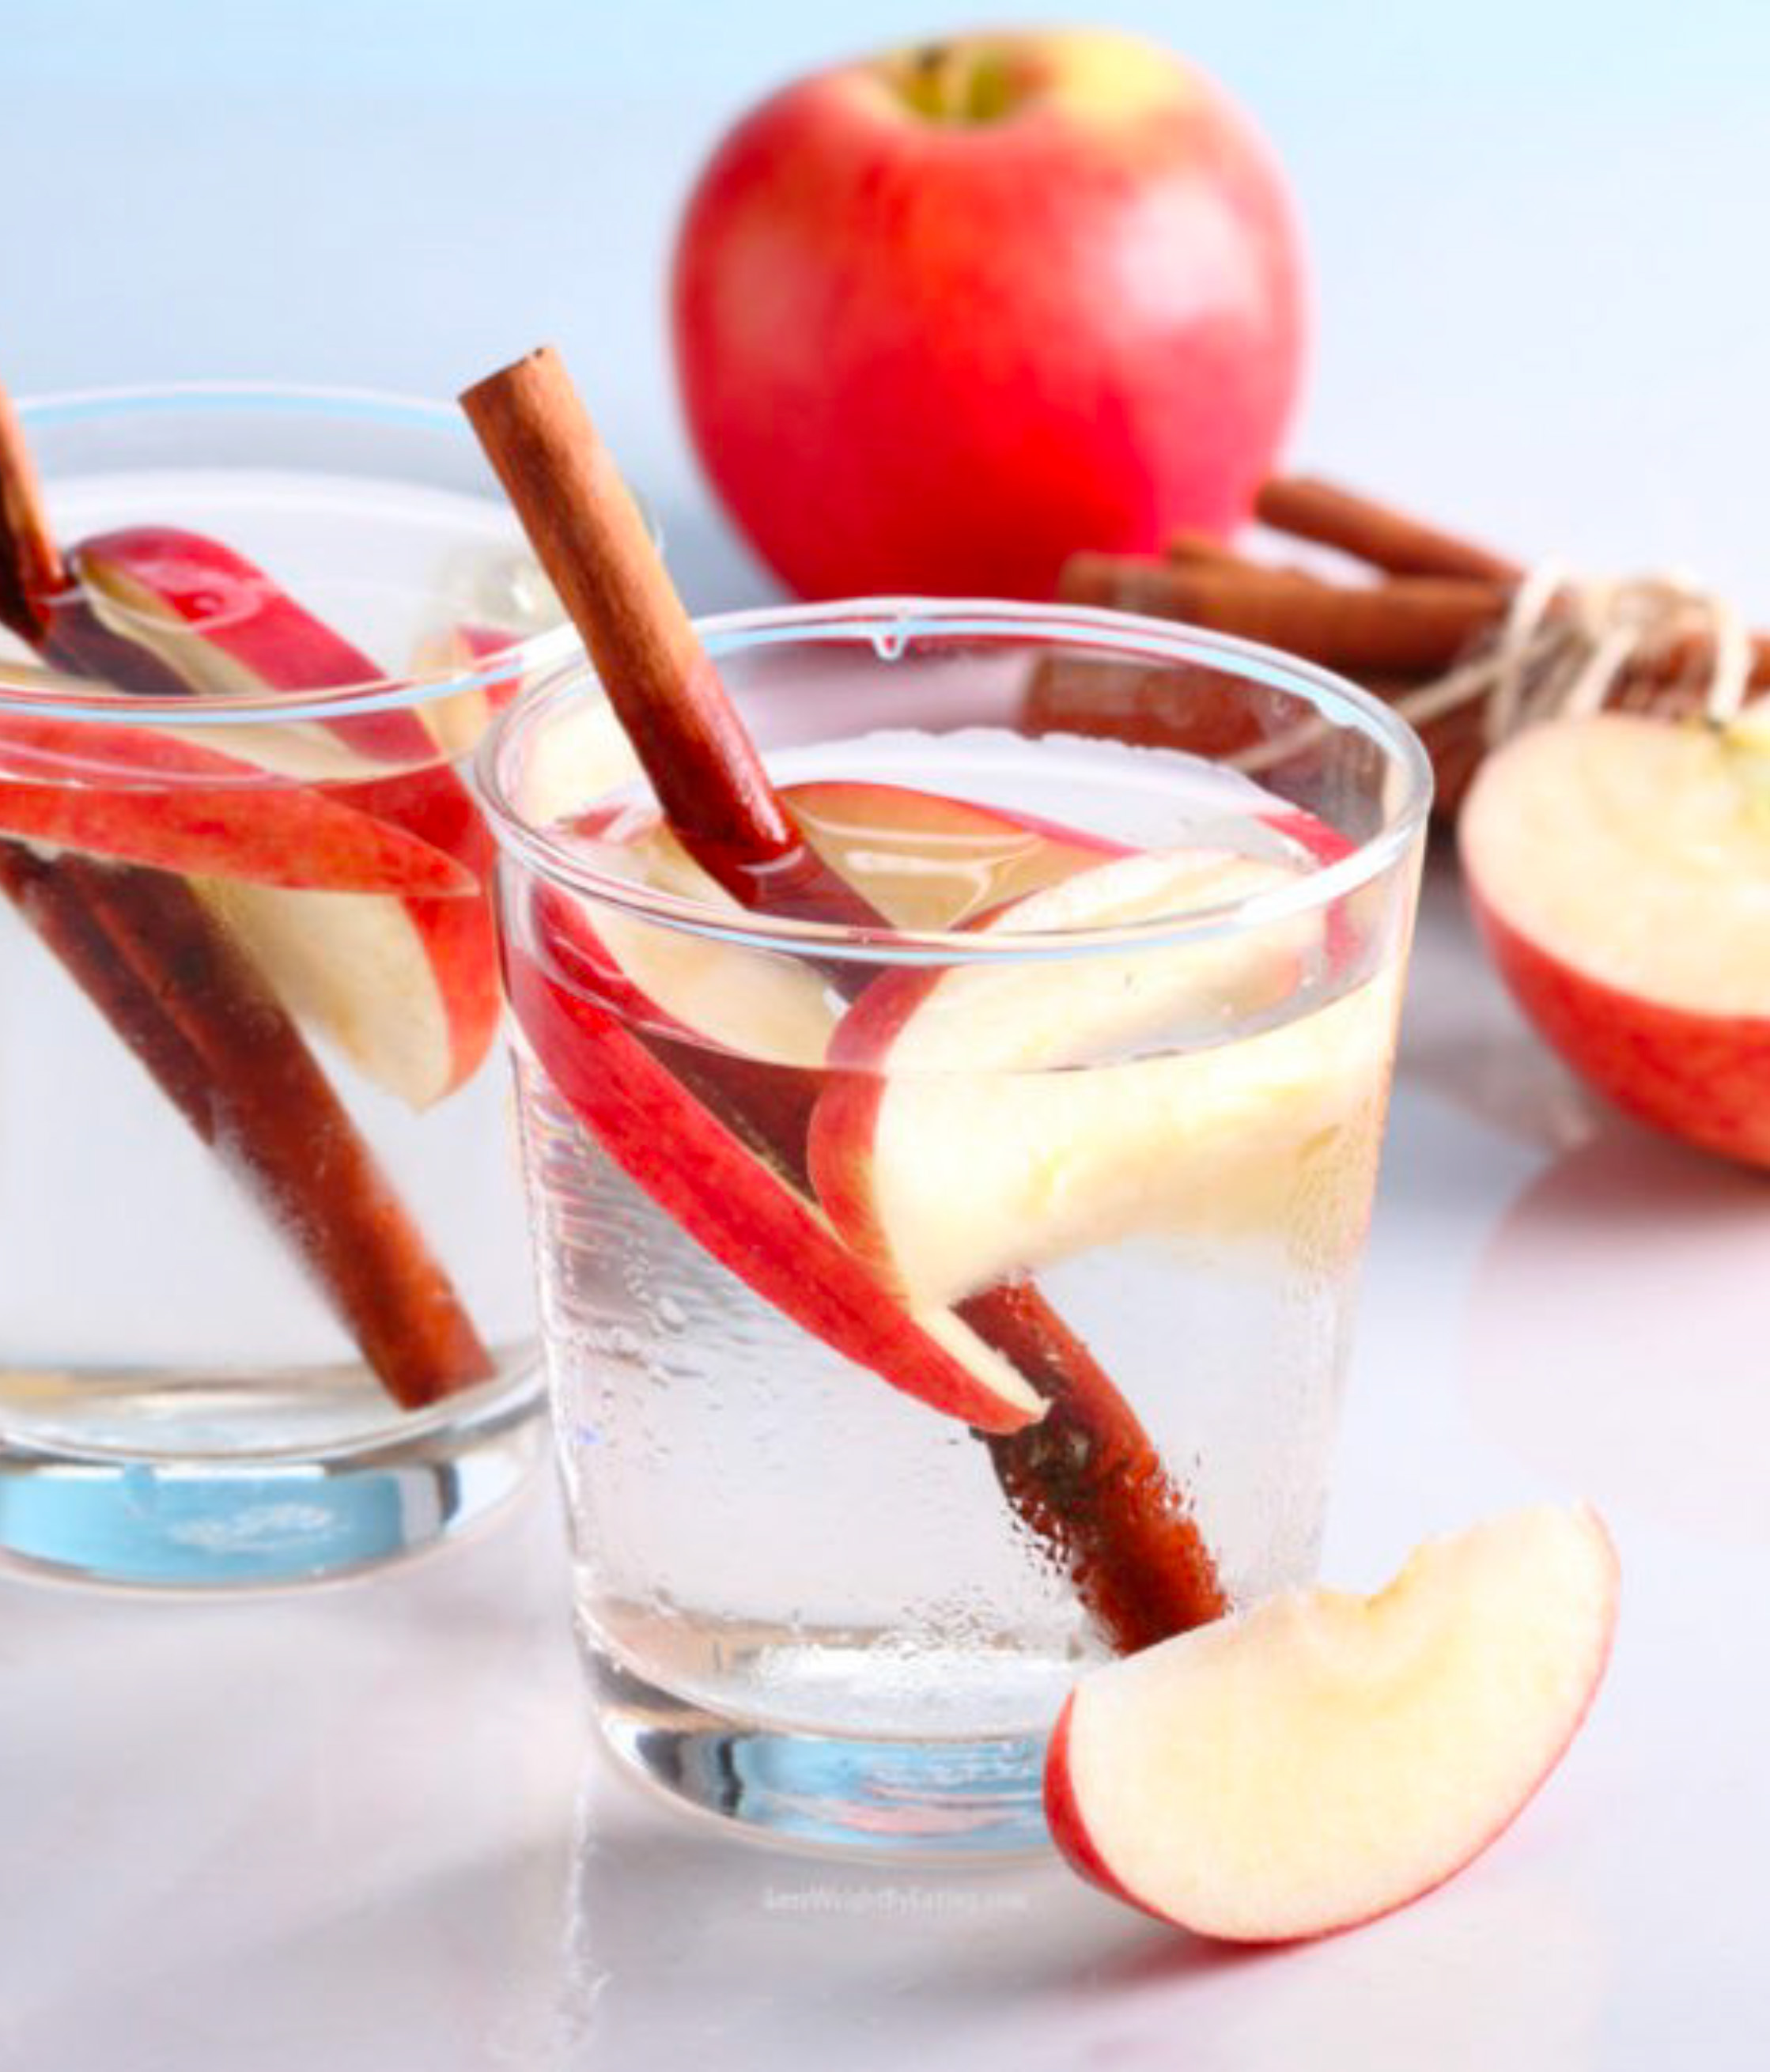 Glasses of water with a cinnamon stick and several thin slices of red apple in each, sitting on a white surface, one centered while the other sits off to the side a little behind it, with another slice in front of the centered glass, and a whole apple, a partially sliced apple, and more cinnamon sticks out of focus in the background